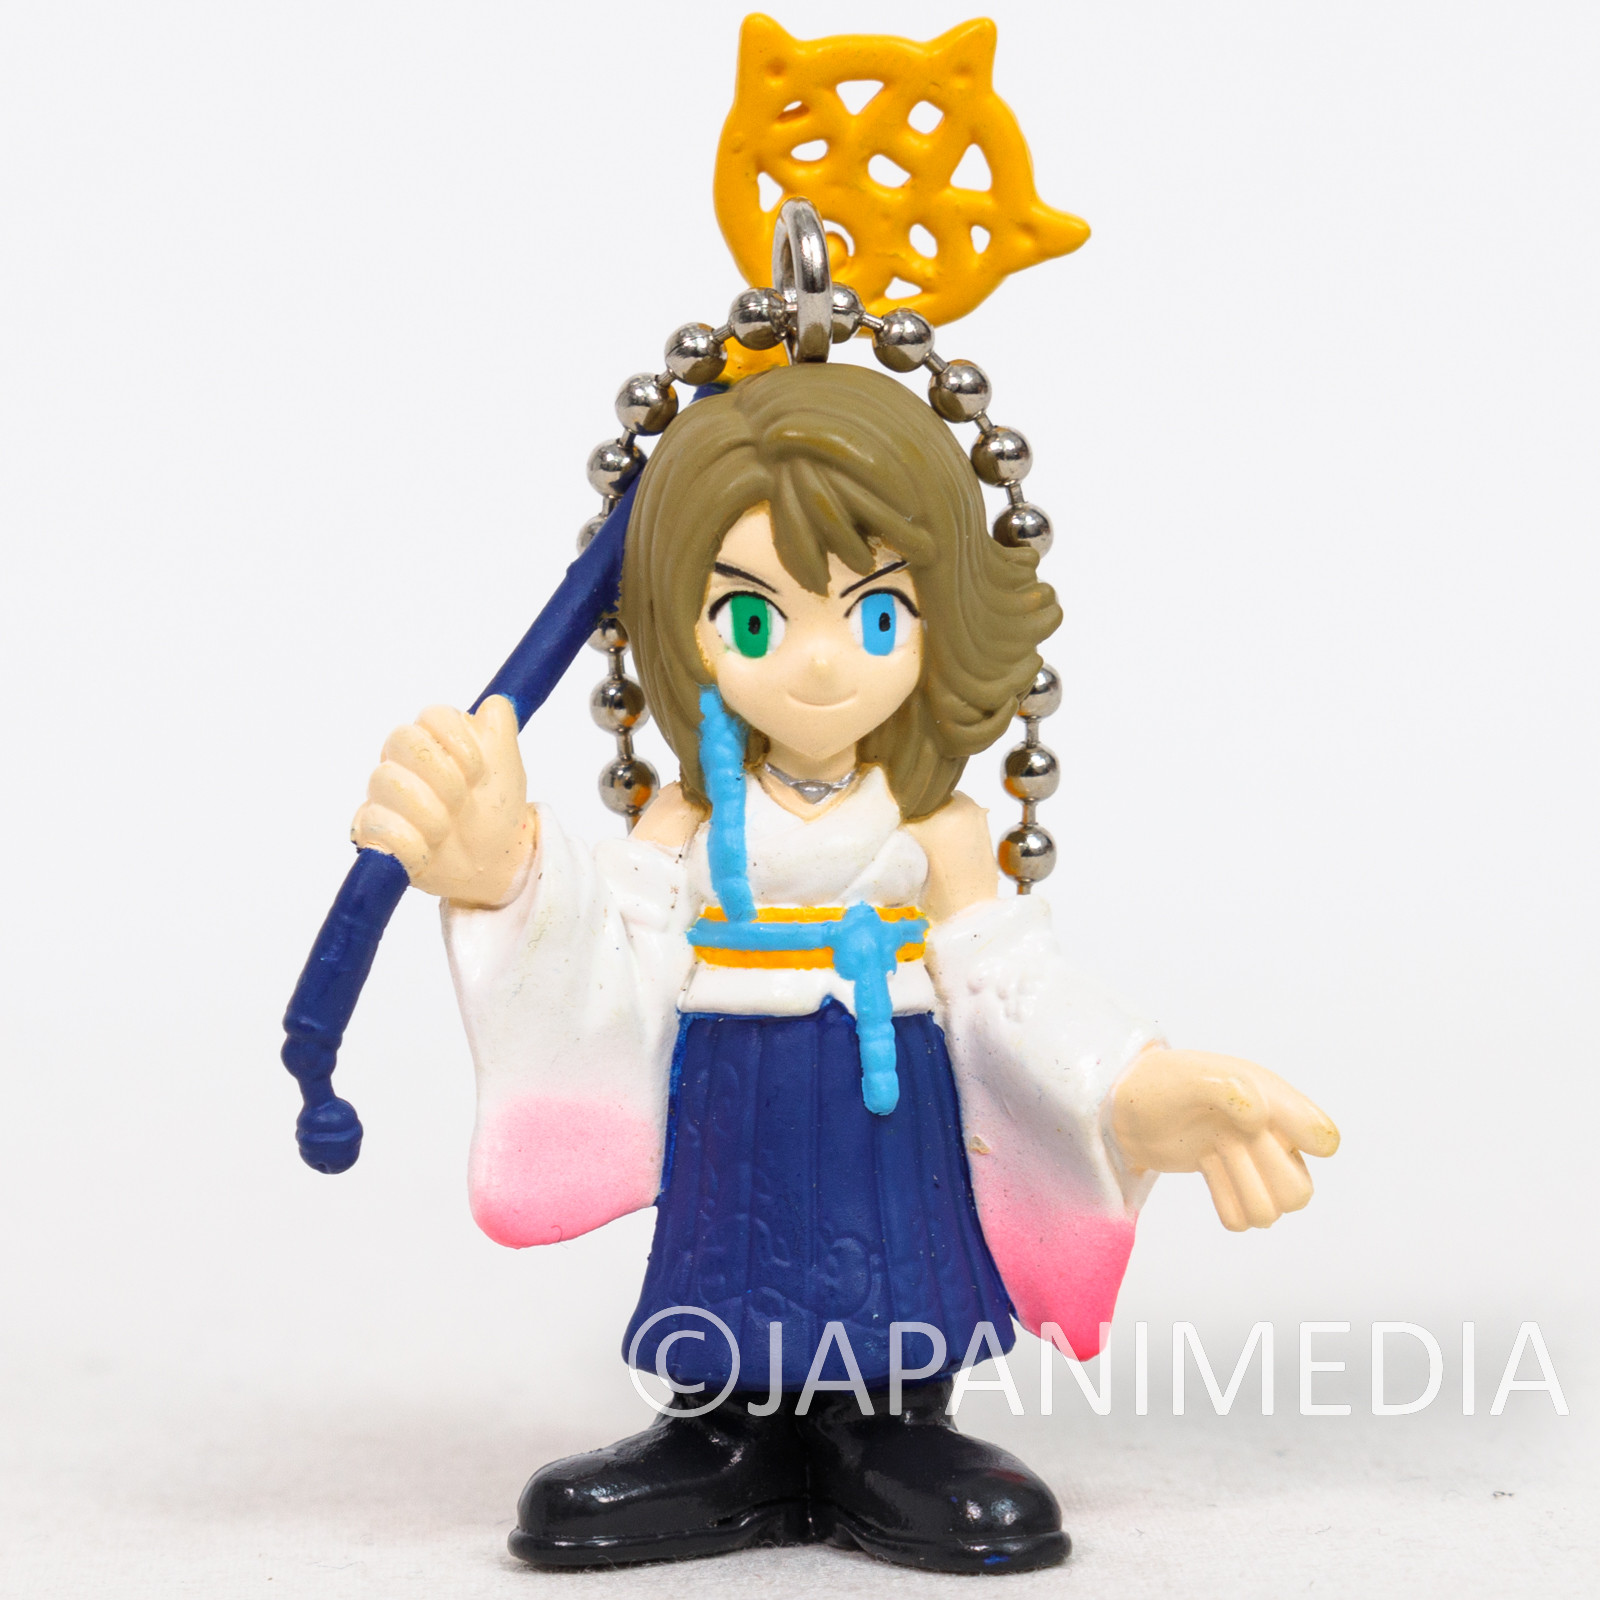 Figure Fantasy Official on X: Figure Fantasy & CLANNAD Collab  Determined! Master, the hot toy Botan is so excited recently, and it asks  Yuki to bring you the good news--- two popular